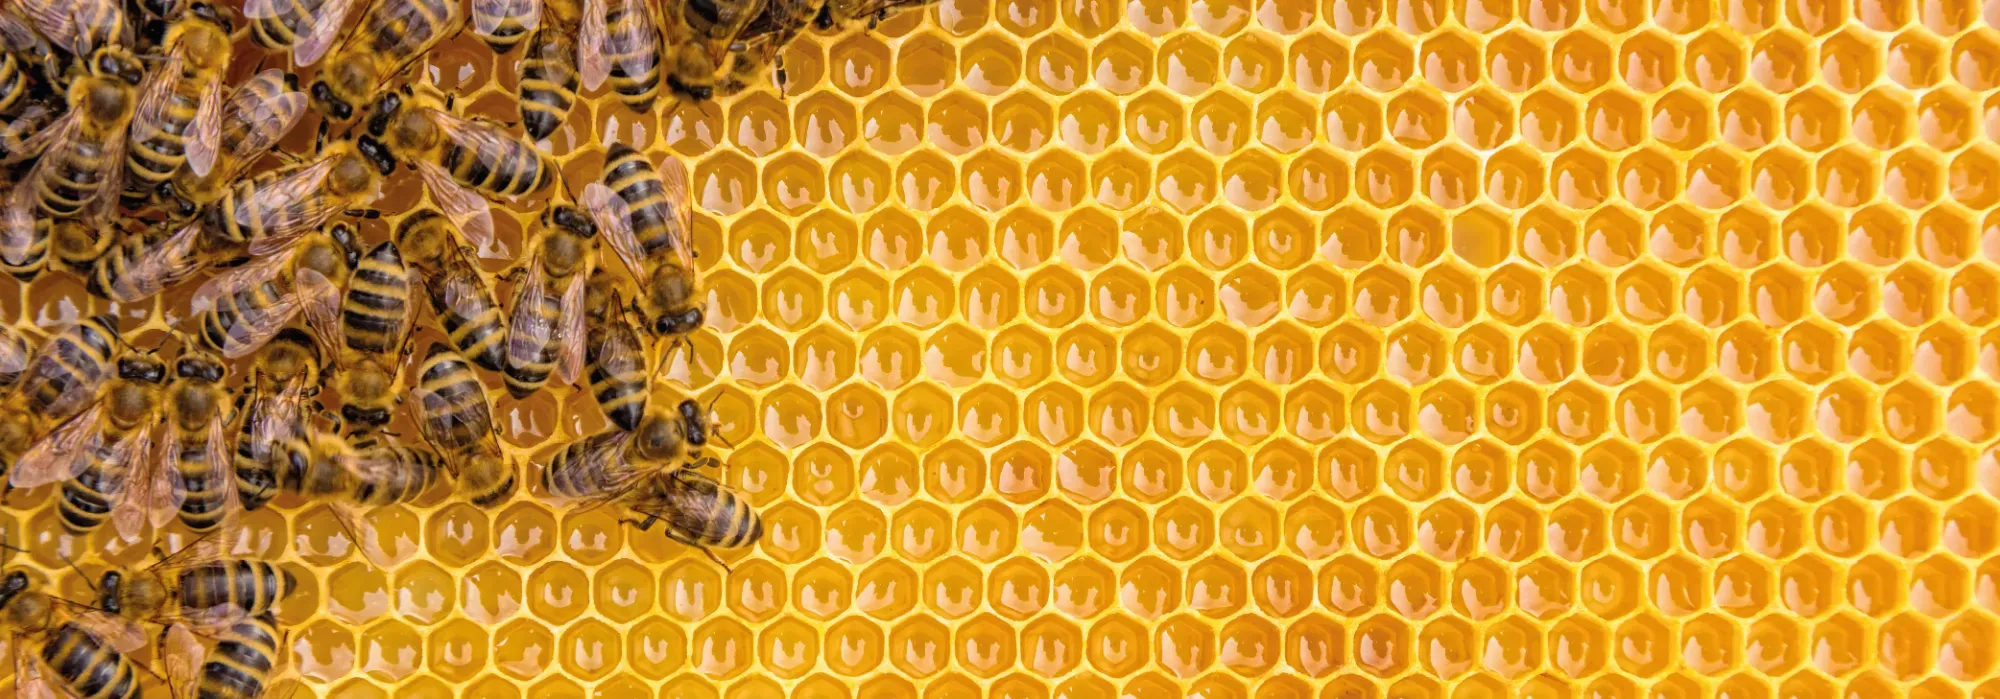 Bees on top of honeycomb